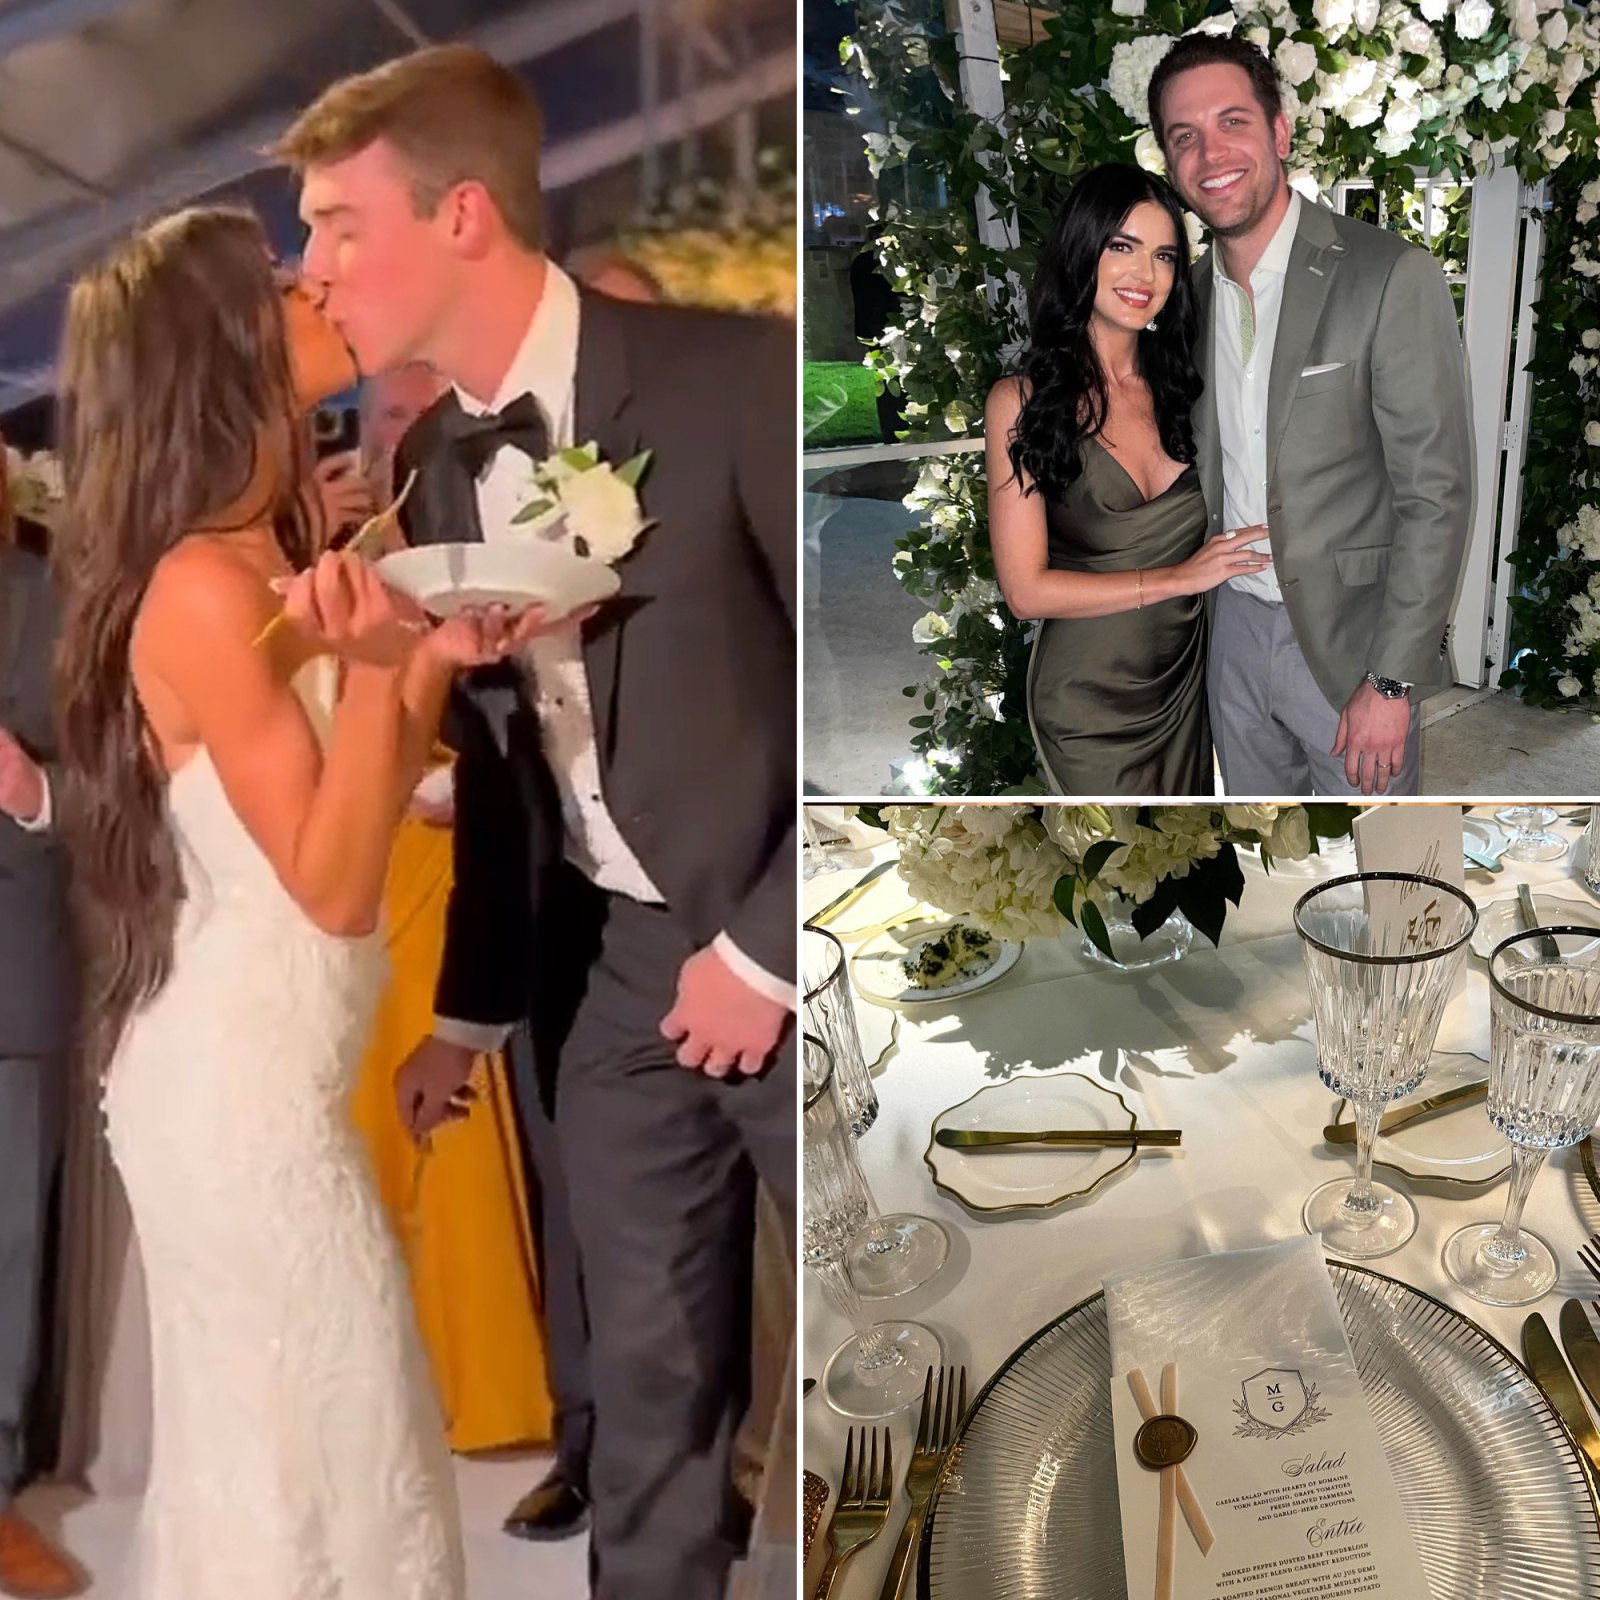 Inside Madison Prewett’s Wedding to Grant Troutt – See the Bachelor Nation Stars Who Attended